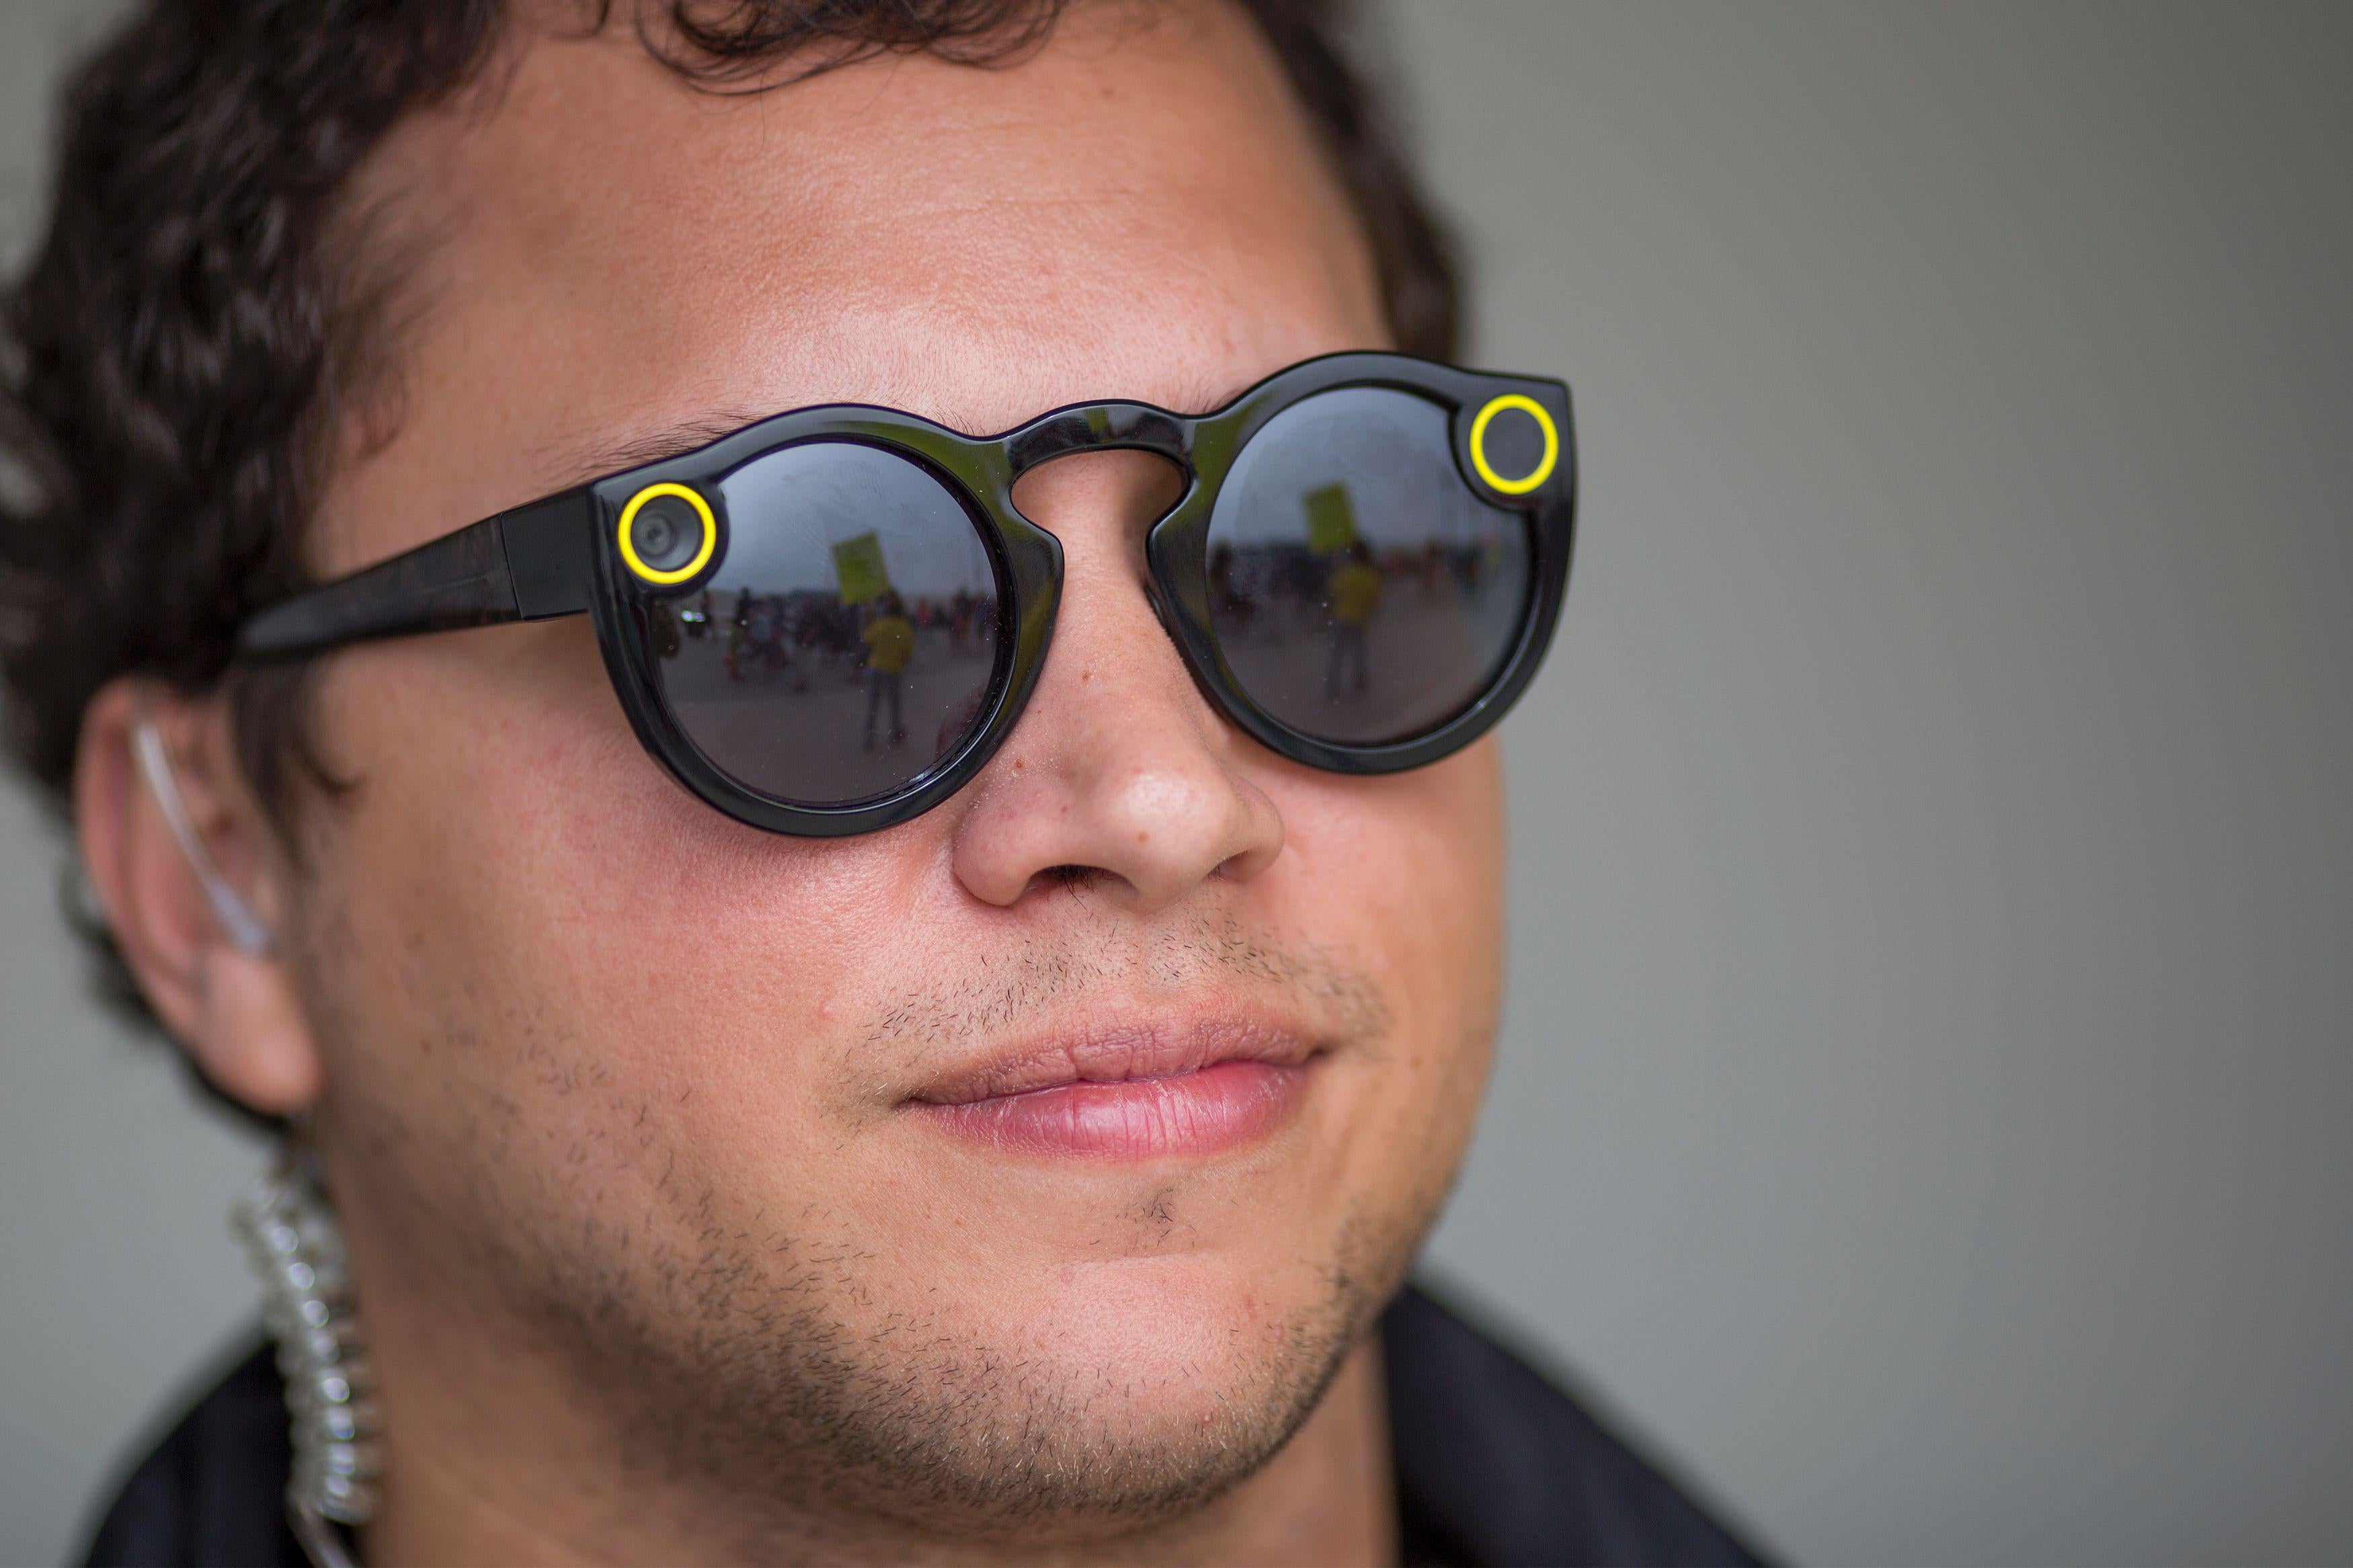 Intelligent gadgets on your nose – predecessors of Snapchat Spectacles